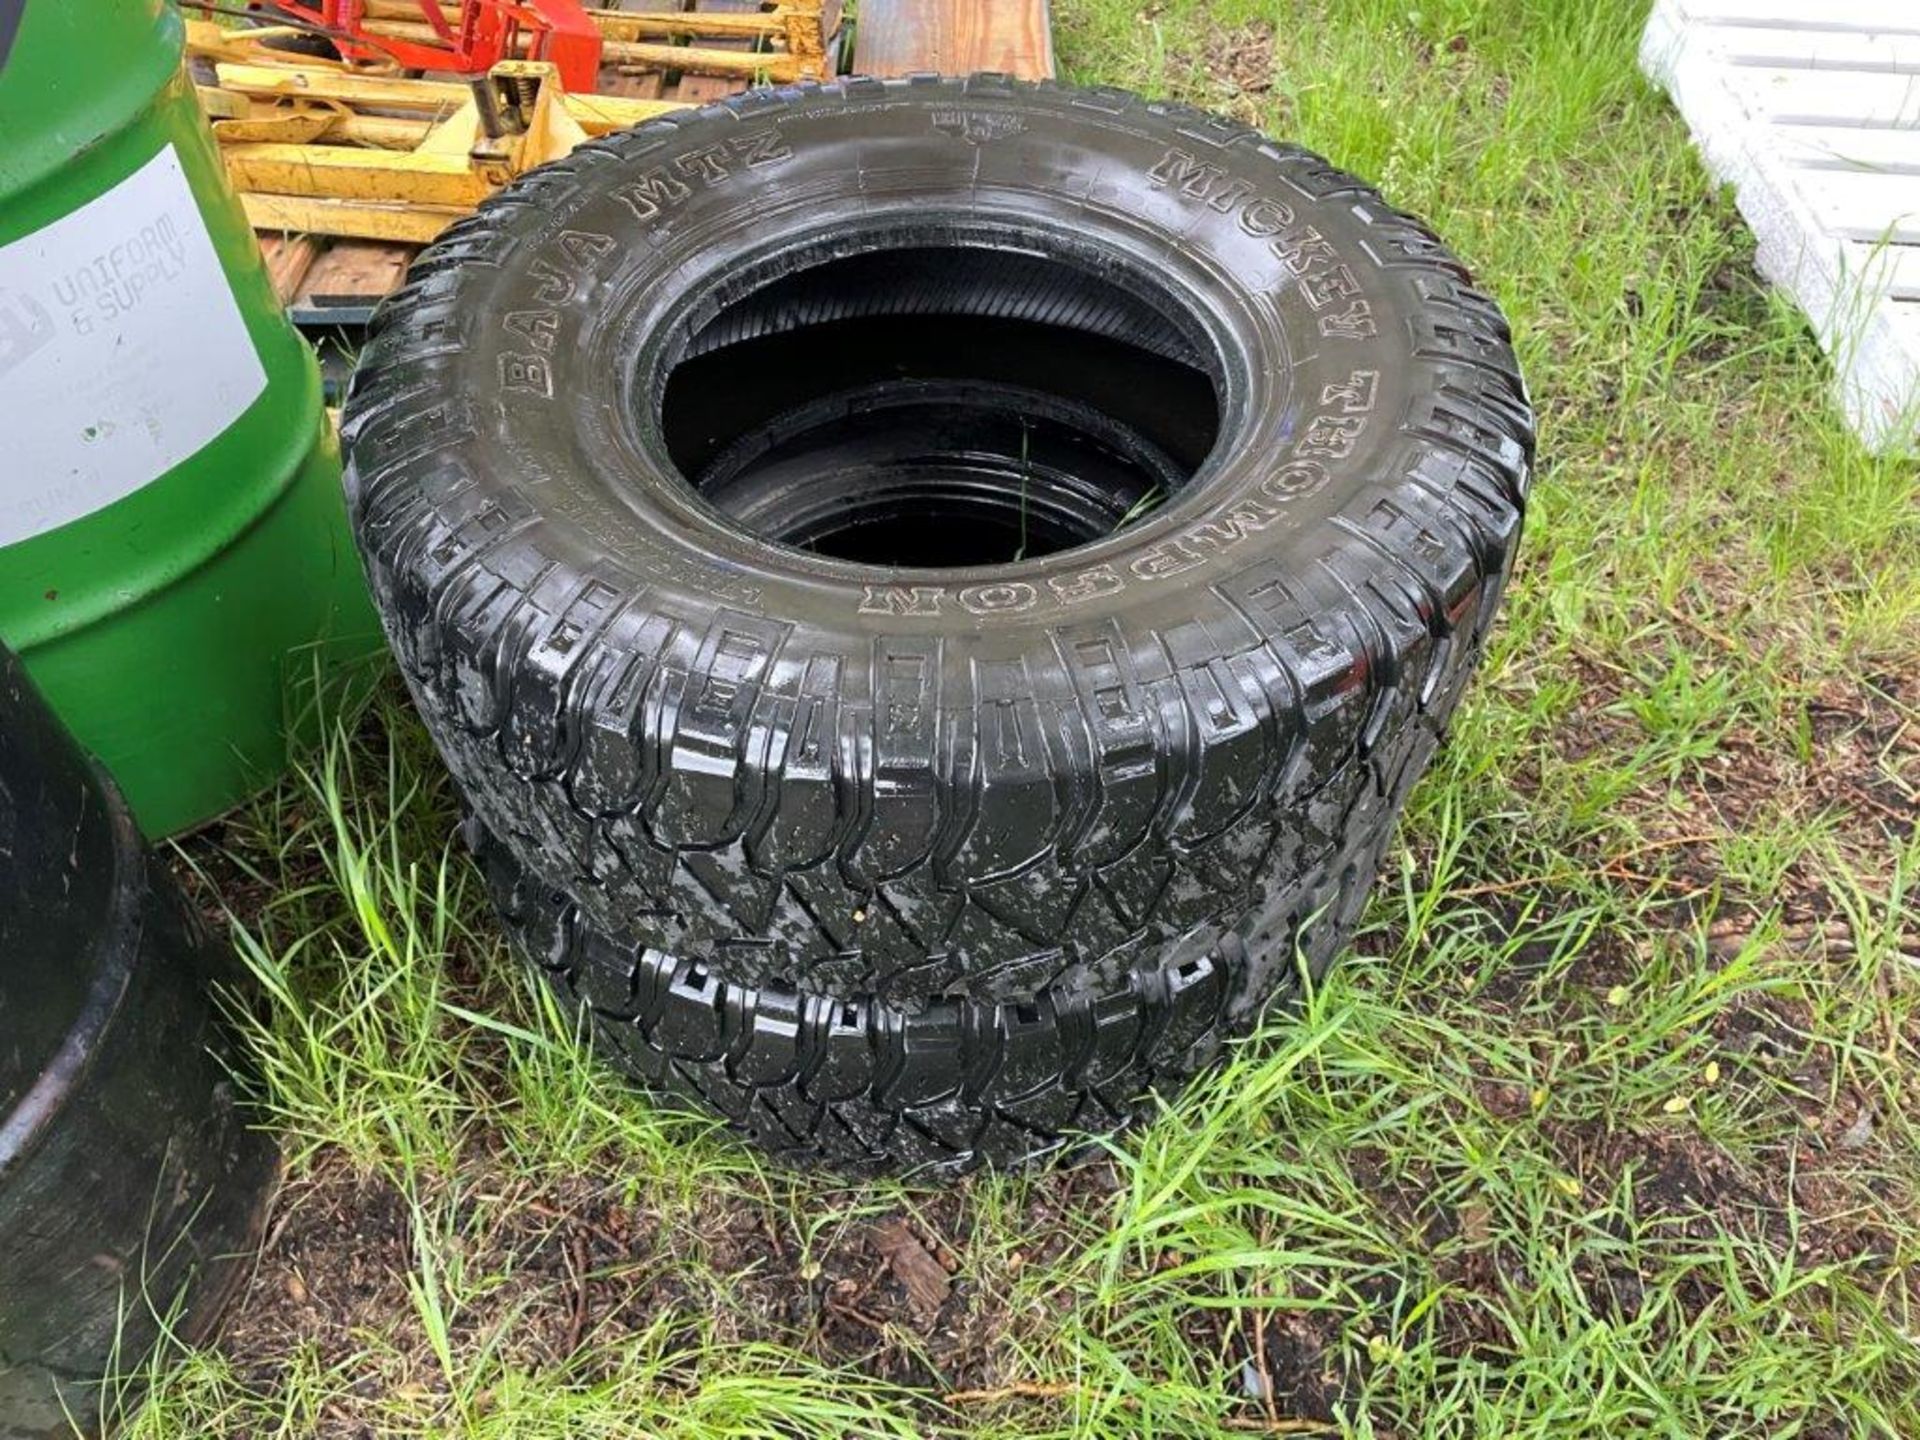 PAIR OF MICKEY THOMPSON BAHA LT285 75 R16 TIRES - Image 2 of 4